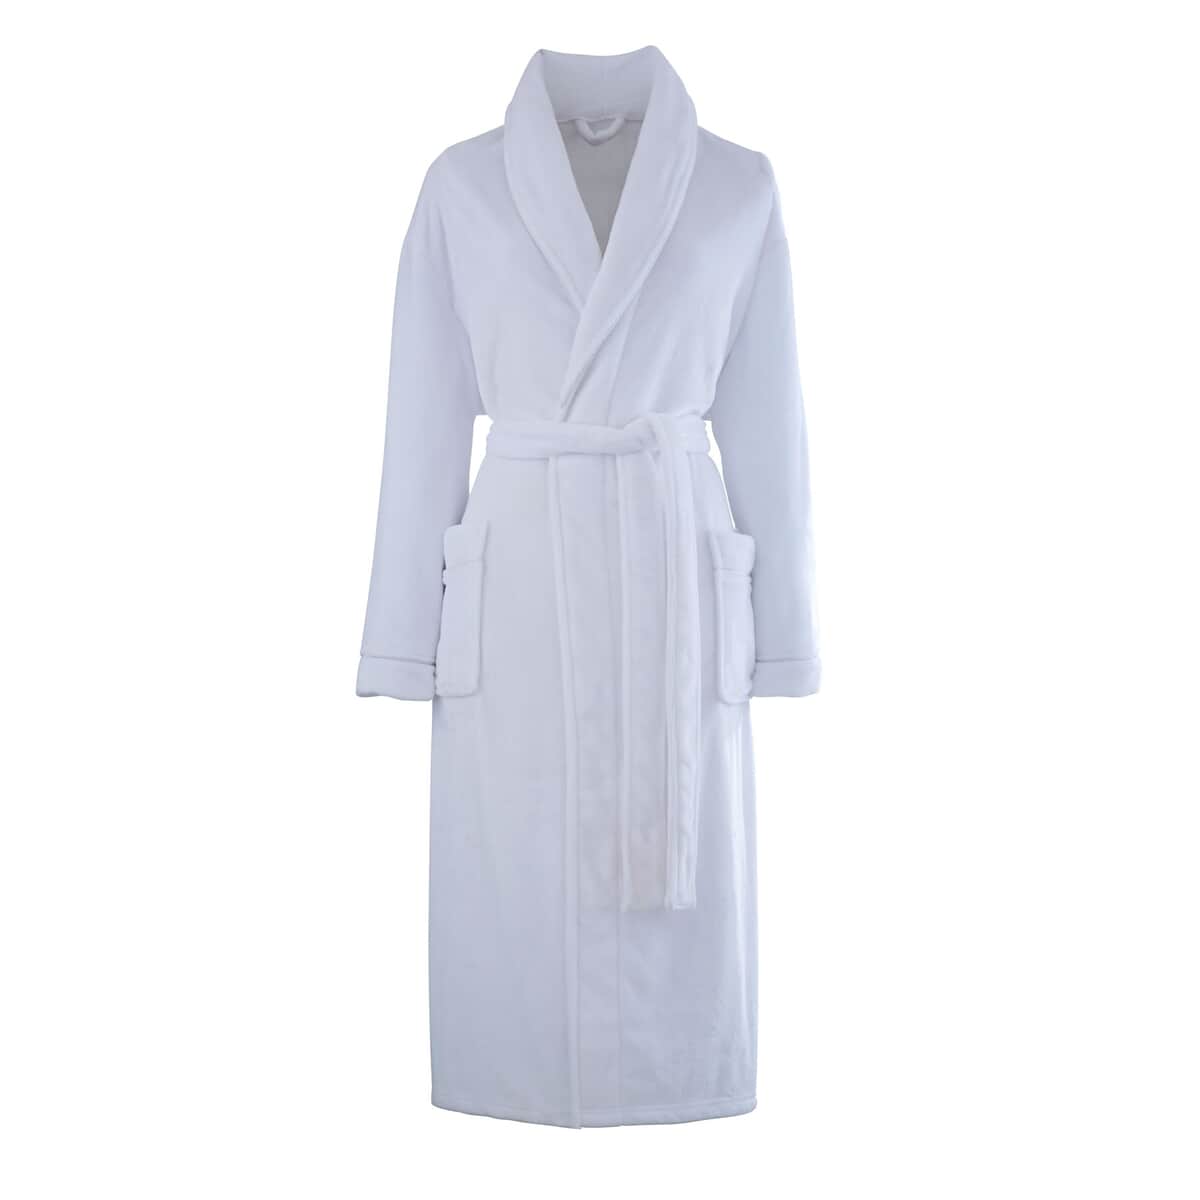 Catherine Lansfield So Soft Robe White large